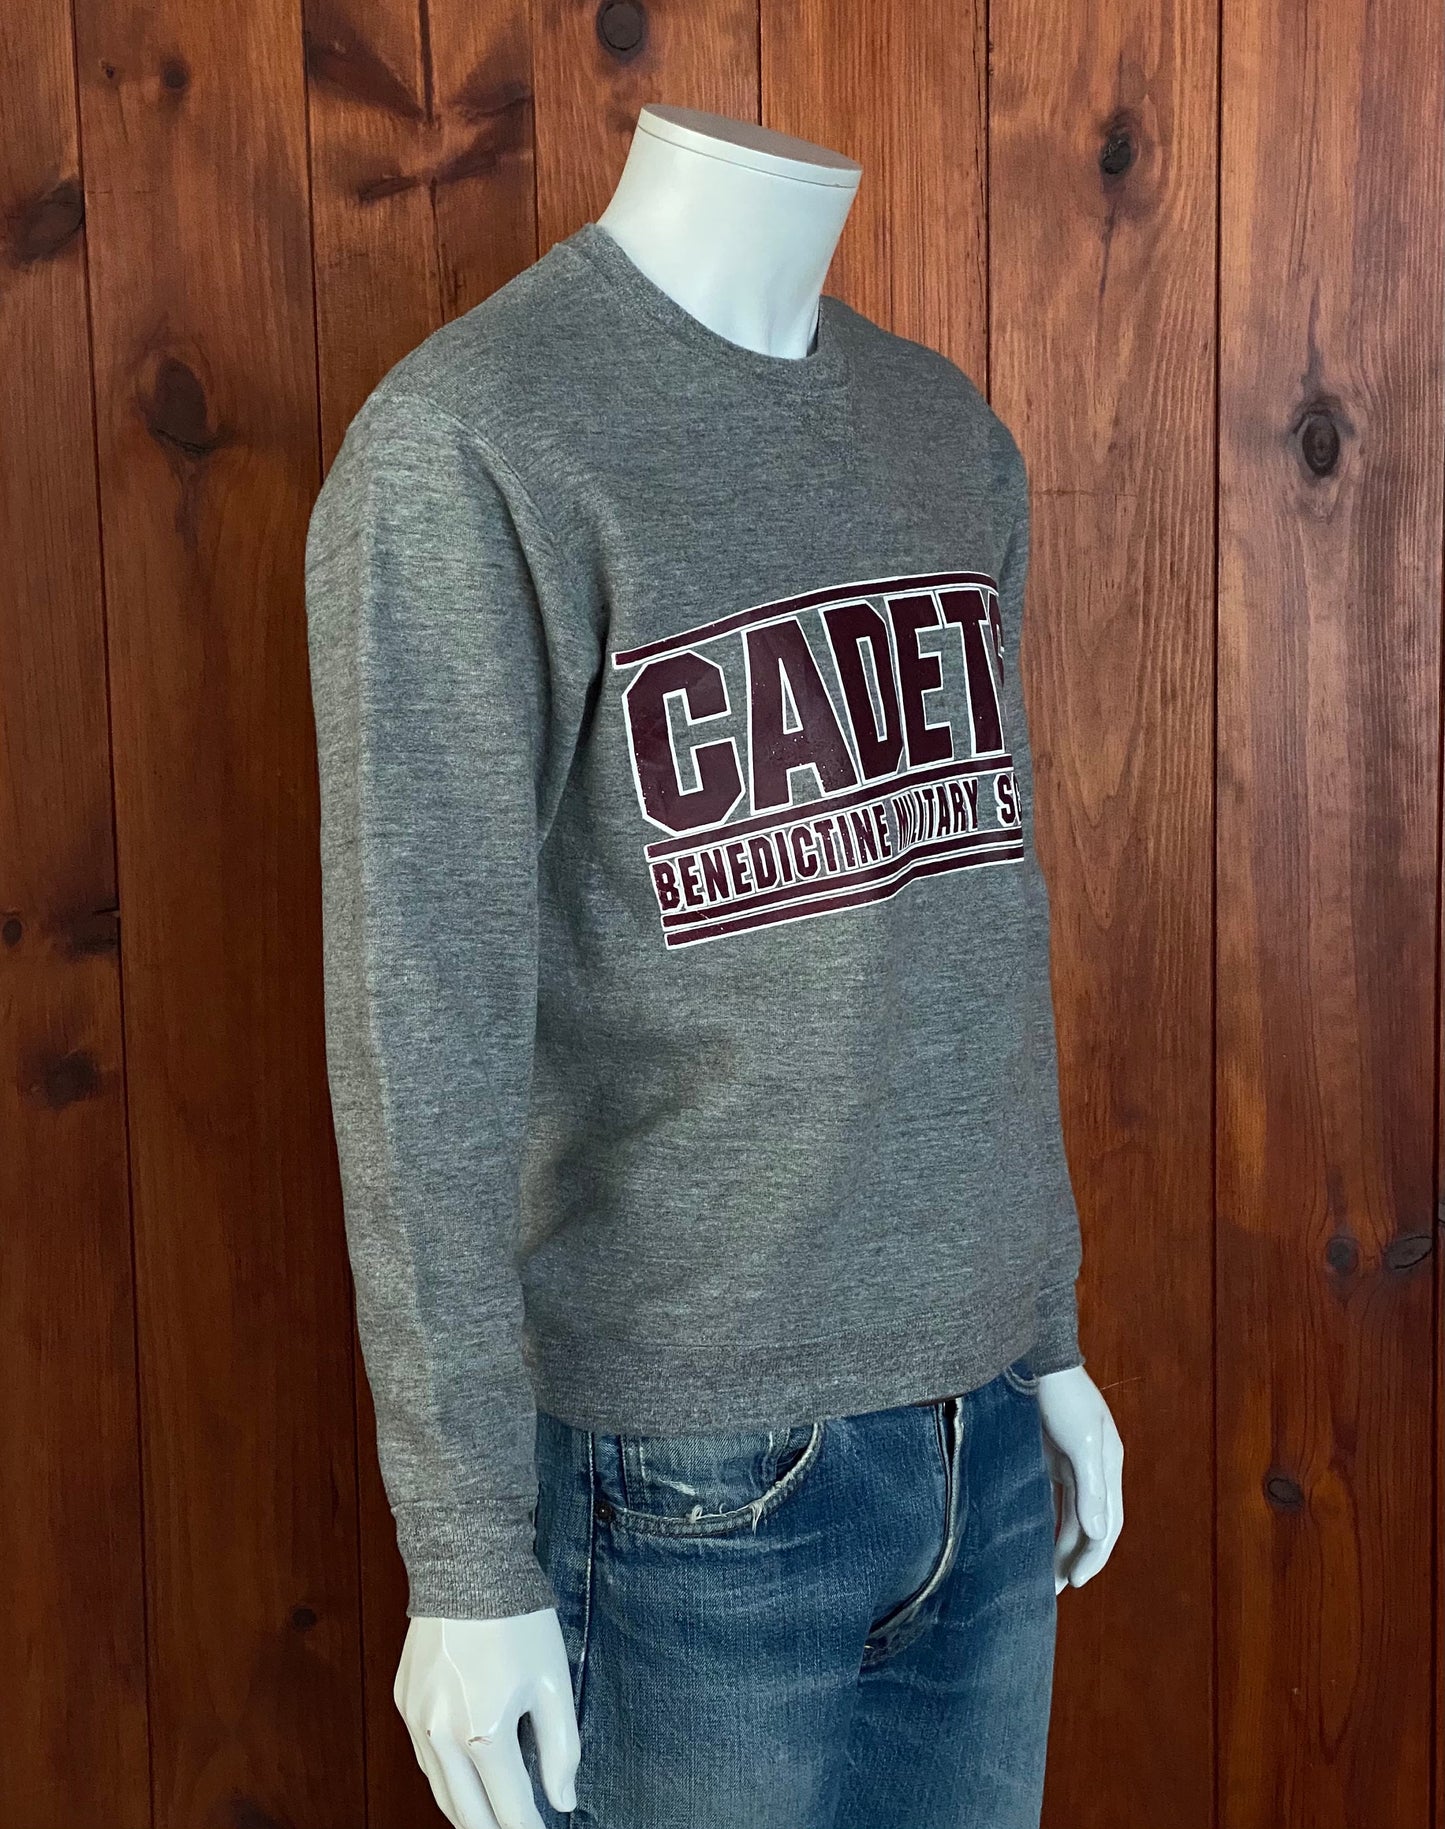 Vintage 80s sweatshirt made by Russell, size M - Retro style with American craftsmanship.